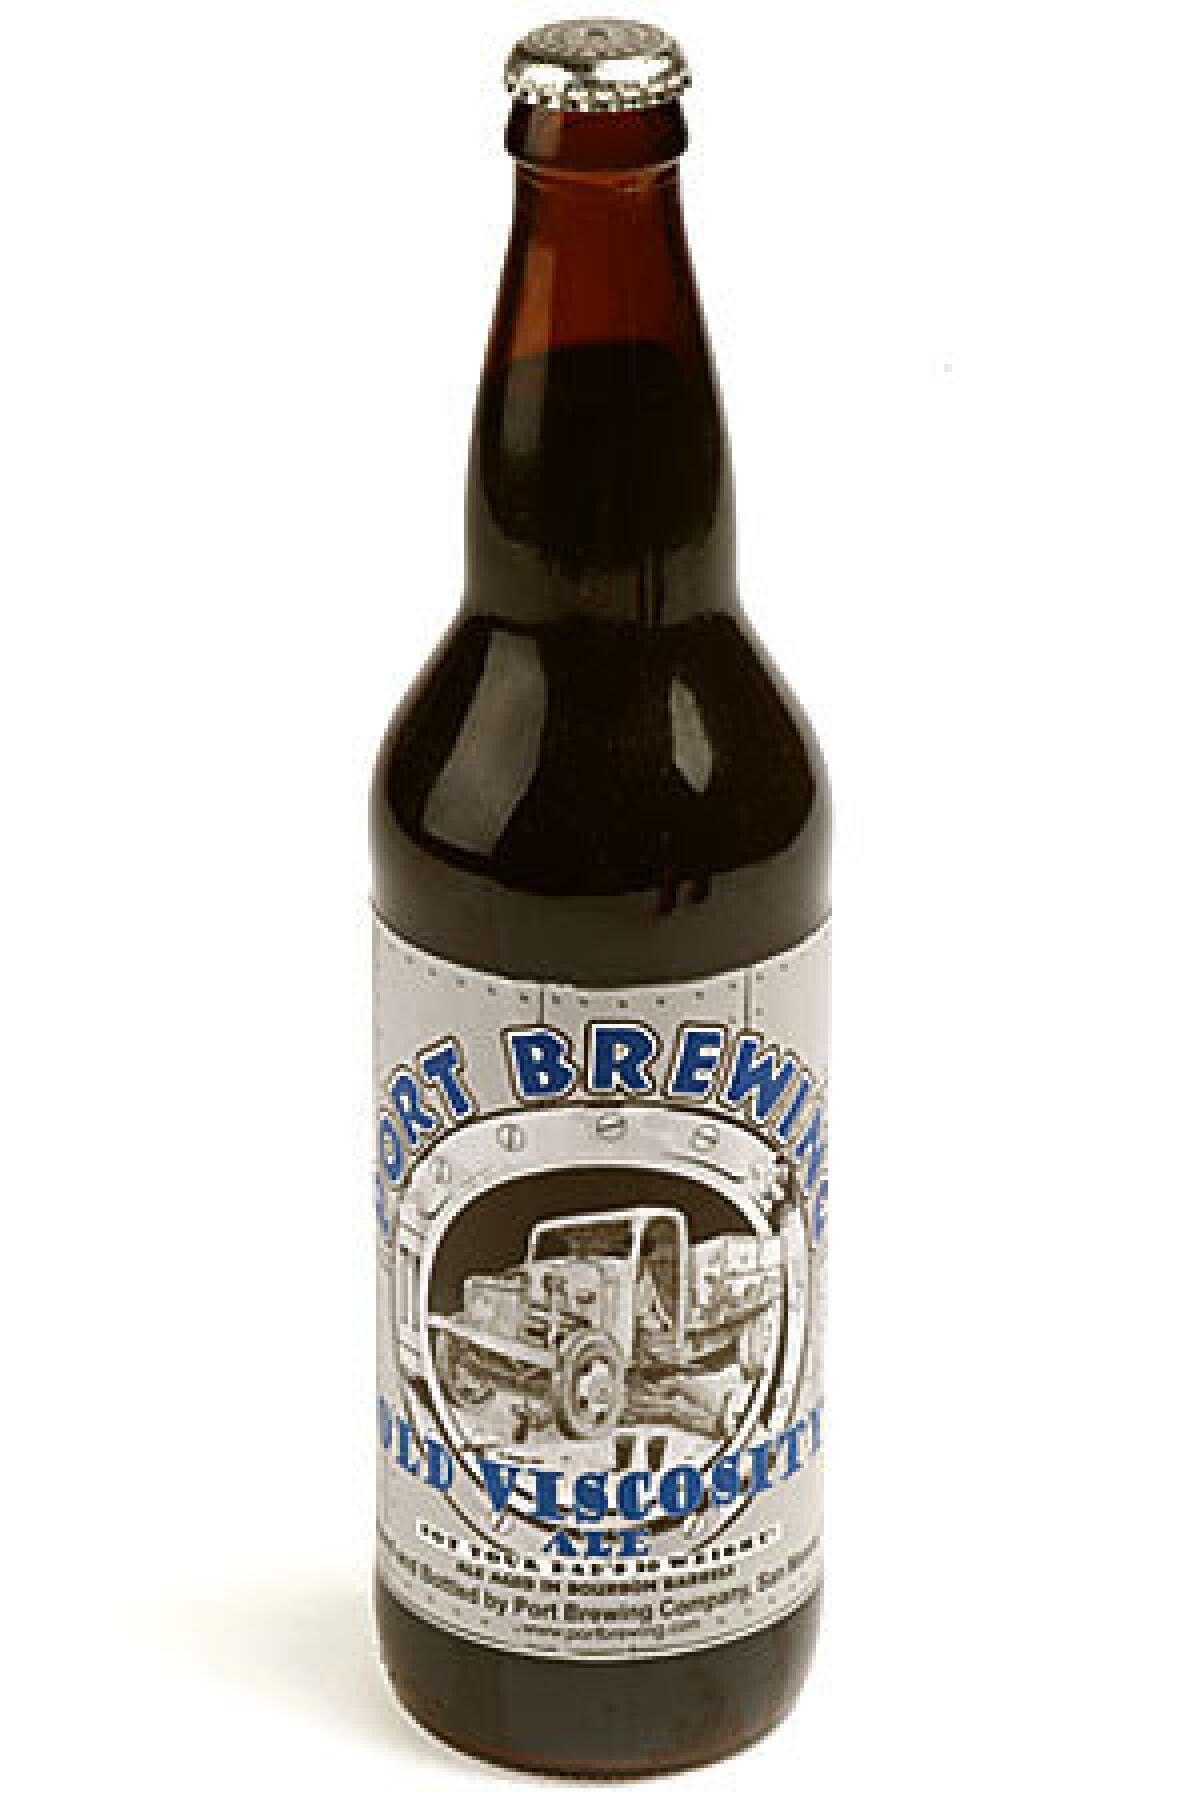 BEER OF THE MONTH: Port Brewing's Old Viscosity. RECENT & RELATED: Beer gets sour -- so pucker up Pick out a wine with Times restaurant critic S. Irene Virbila Recipes from the L.A. Times Test Kitchen